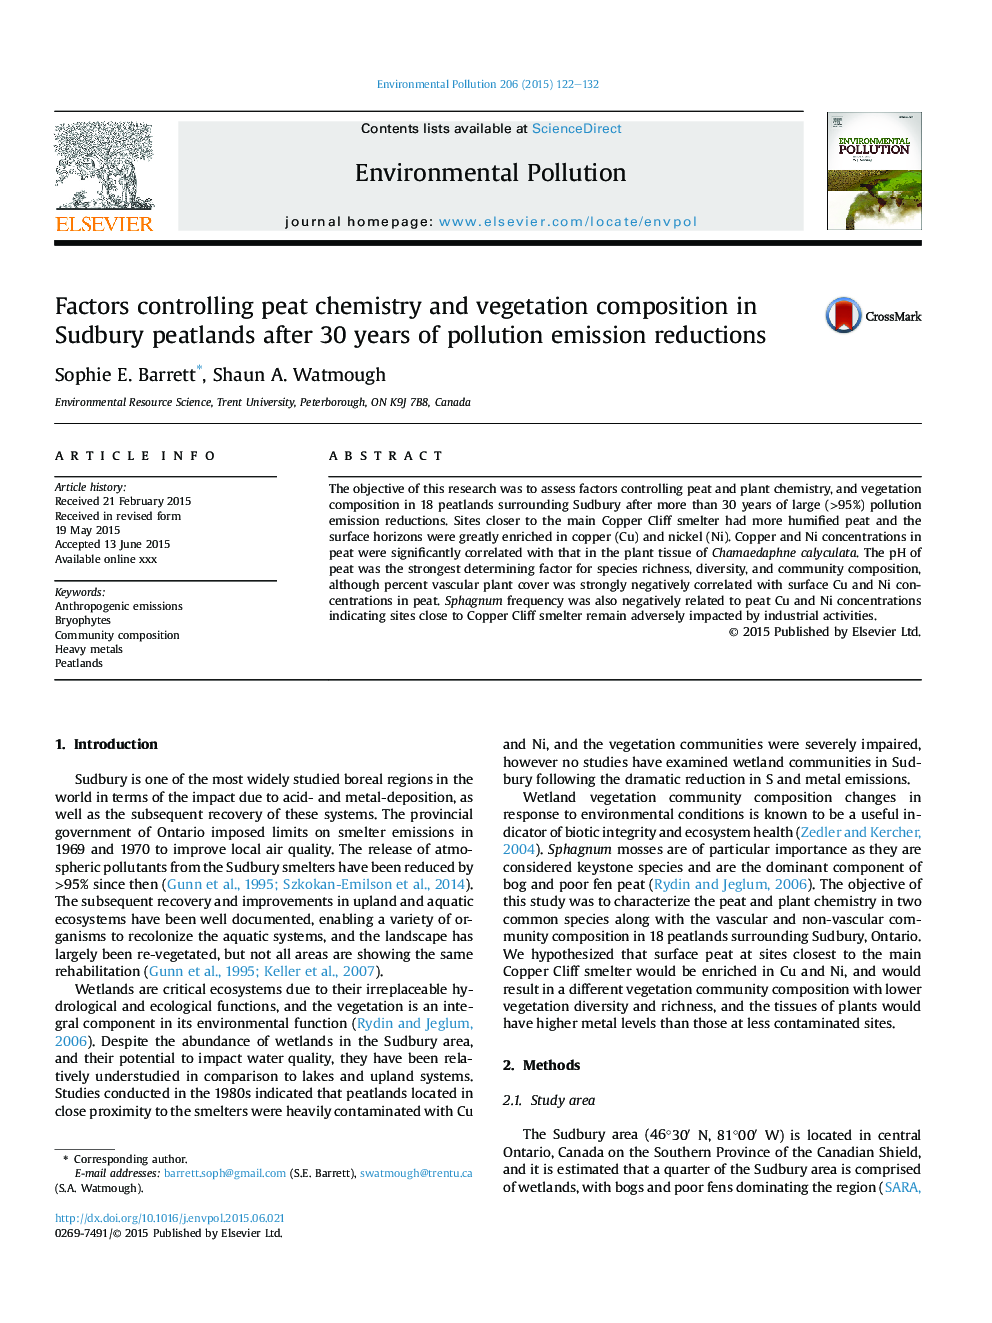 Factors controlling peat chemistry and vegetation composition in Sudbury peatlands after 30Â years of pollution emission reductions